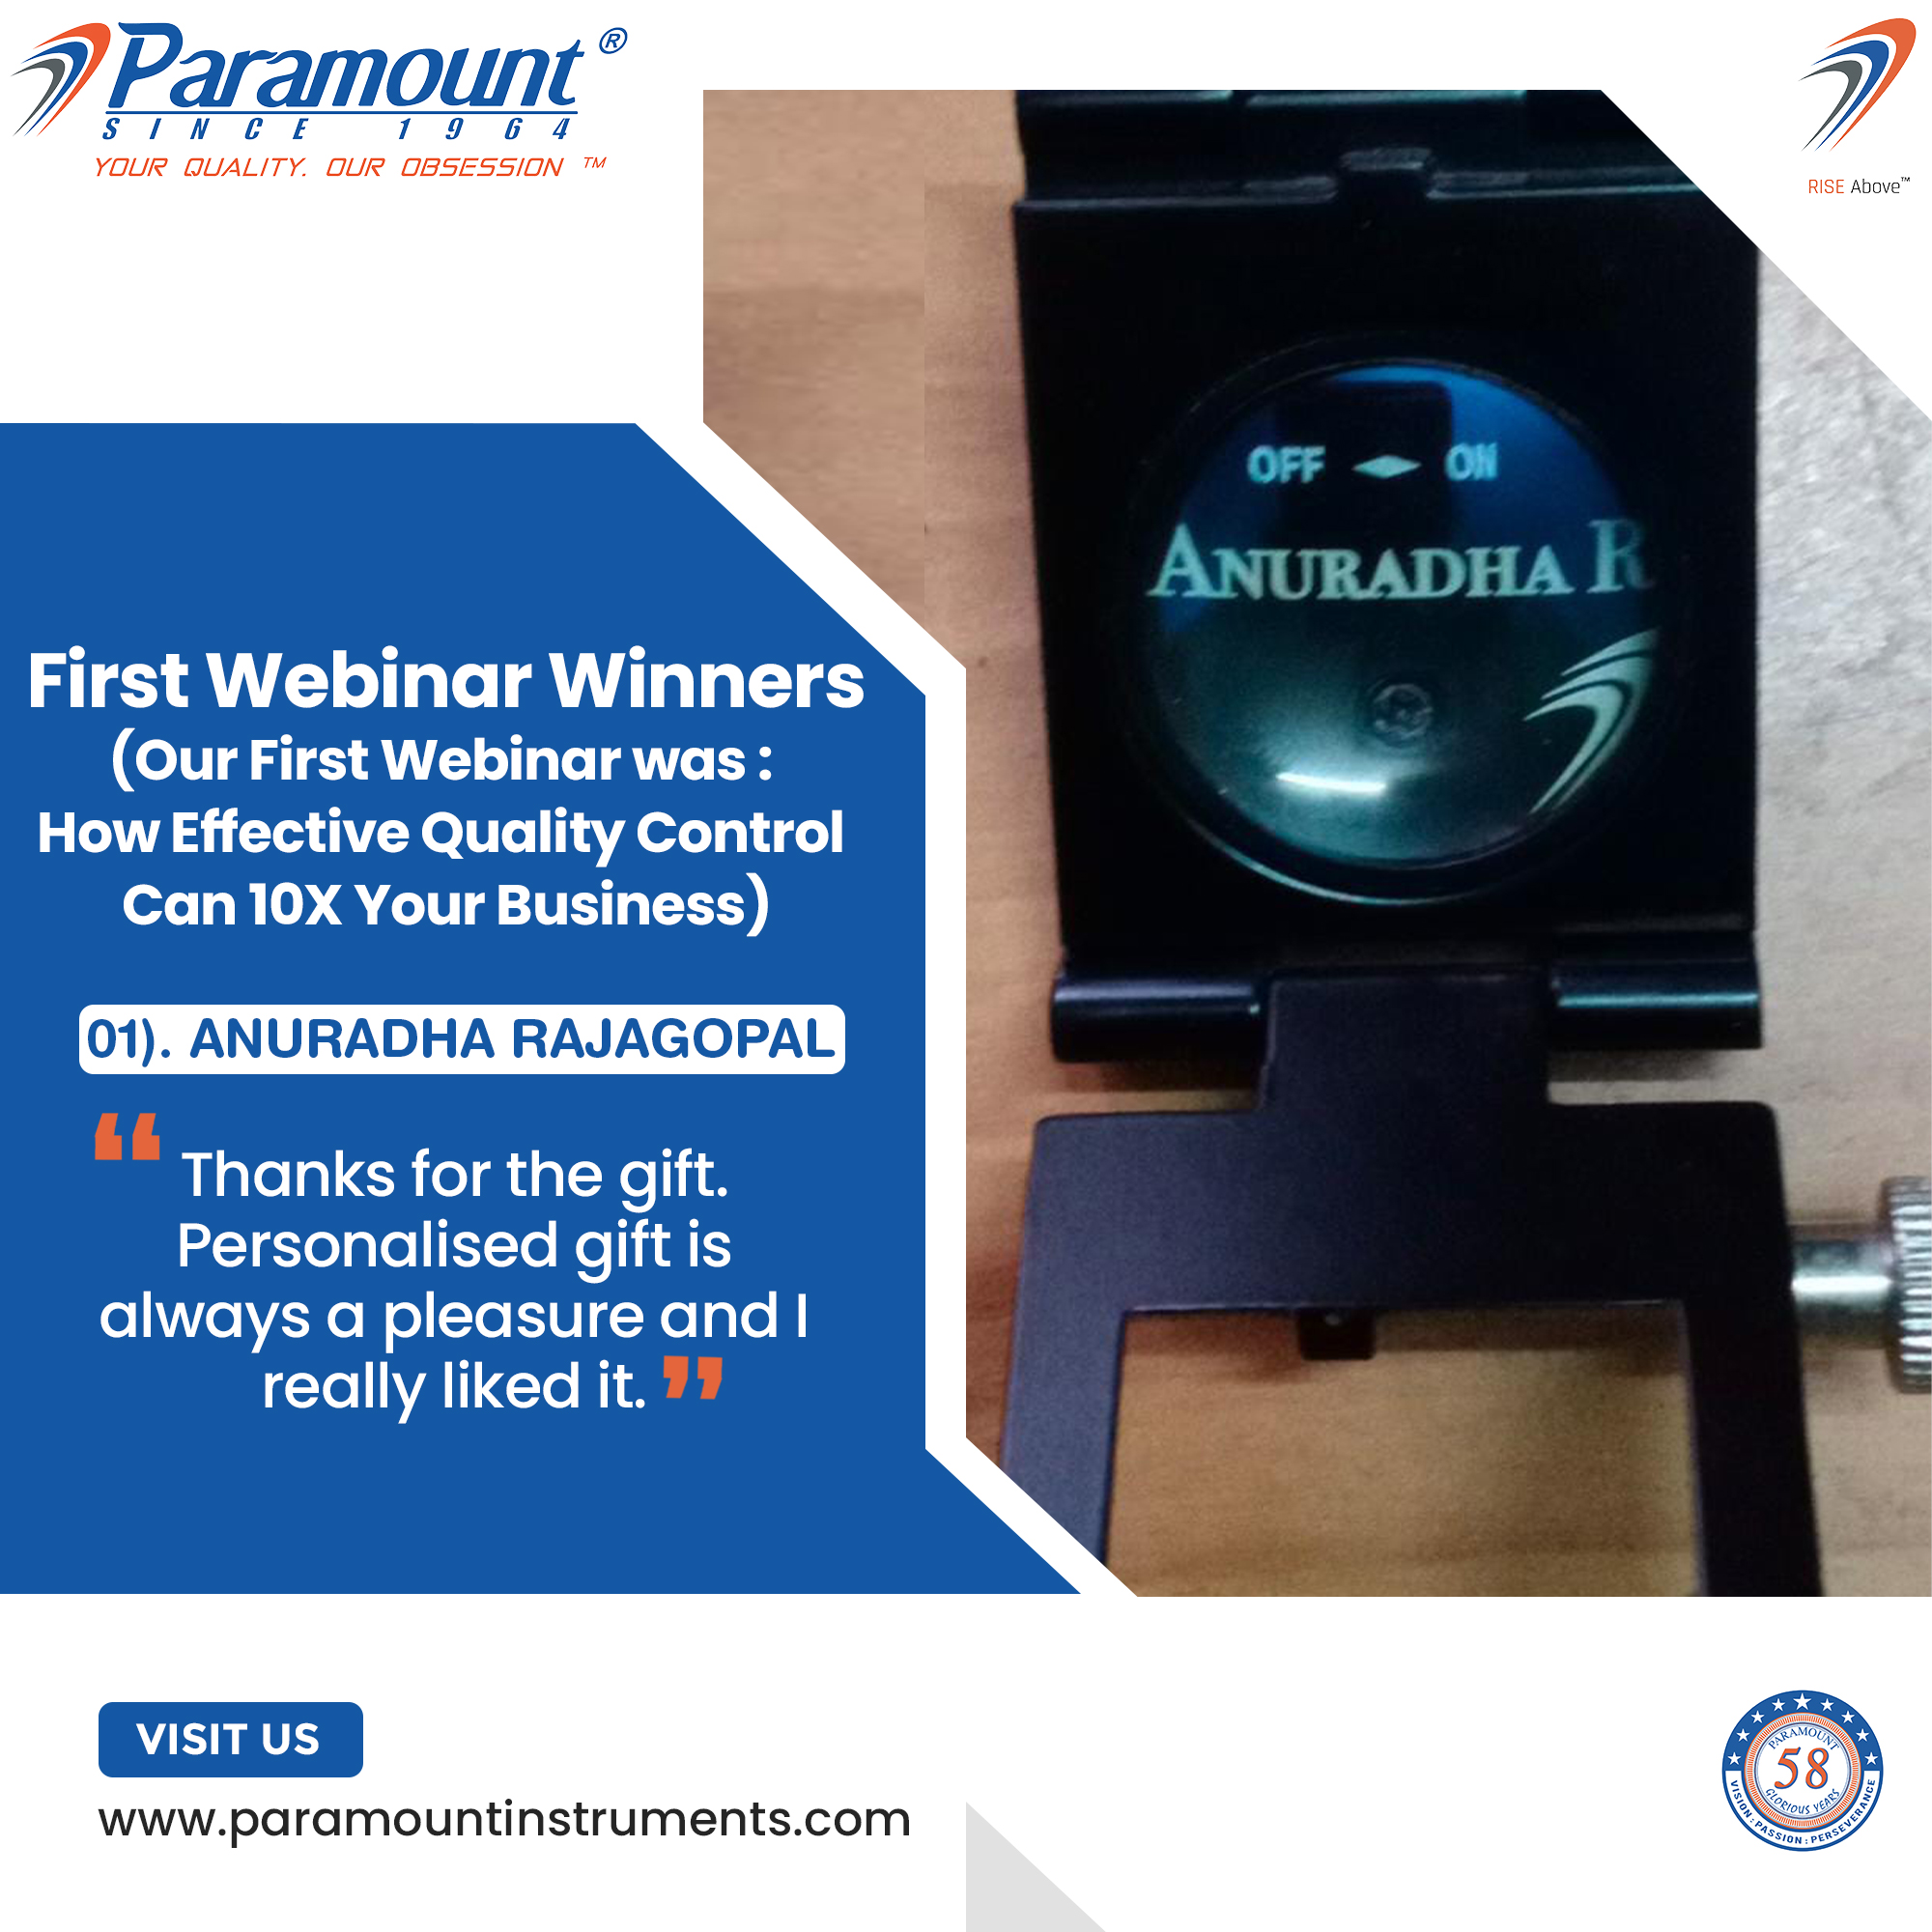 7 Paramount ©

/I NV CF 1 9 6 4

YOUR QUALITY. OUR OBSESSION ™

   
    
   
    

First Webinar Winners
(Our First Webinar was :
How Effective Quality Control
Can 10X Your Business)

01). ANURADHA RAJAGOPAL

Thanks for the gift.
Personalised gift is
always a pleasure and |
really liked it.

VISIT US

www.paramountinstruments.com